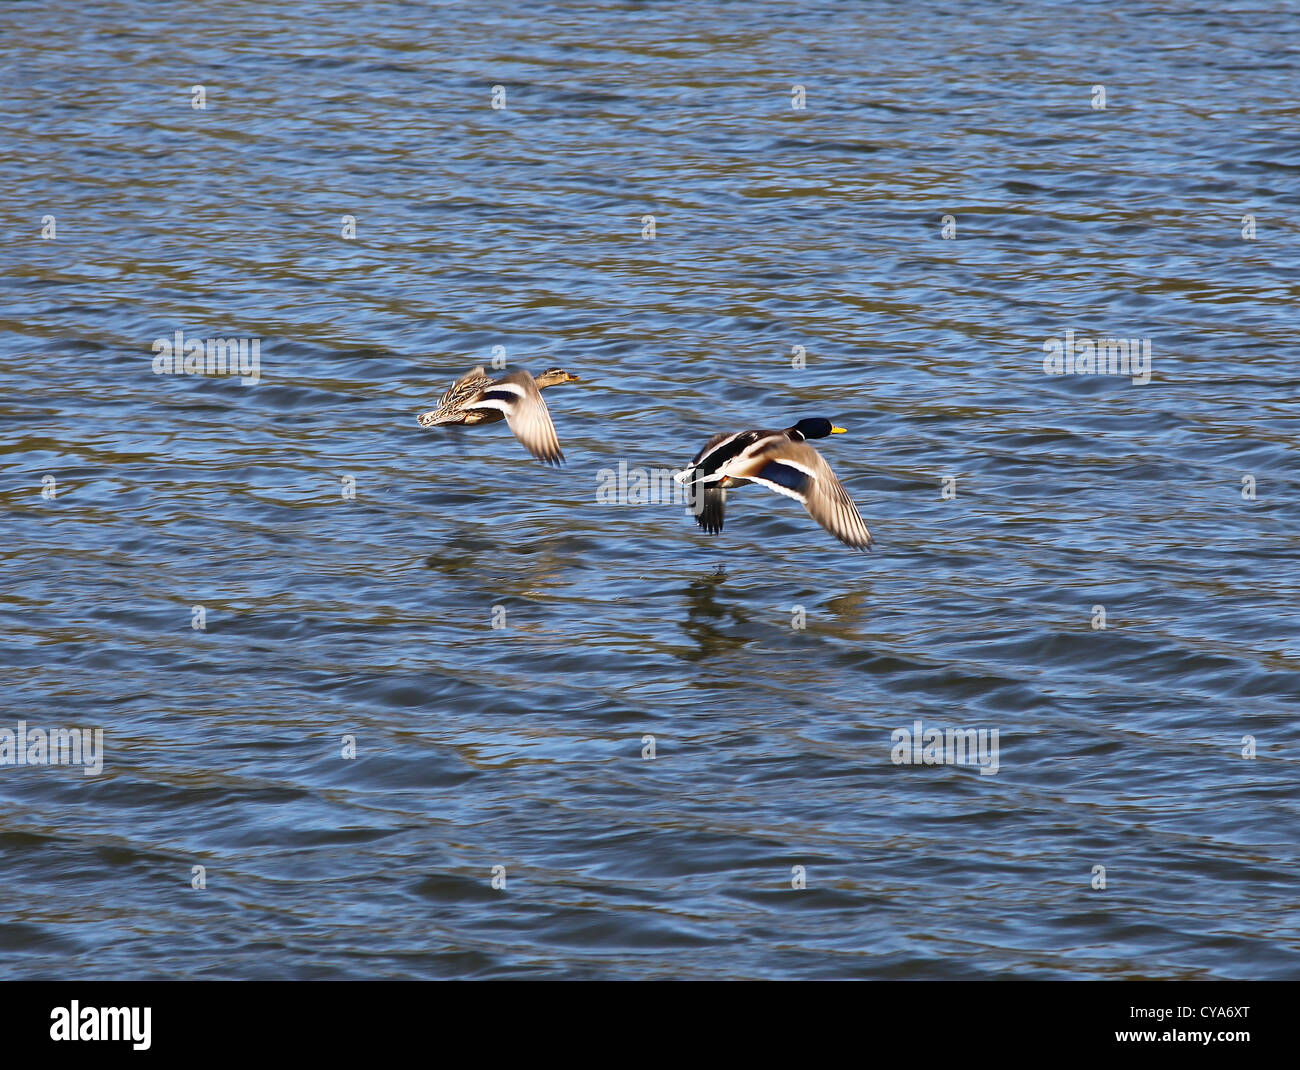 A pair of Mallards or Wild Ducks (Anas platyrhynchos) coming in to land on water Stock Photo